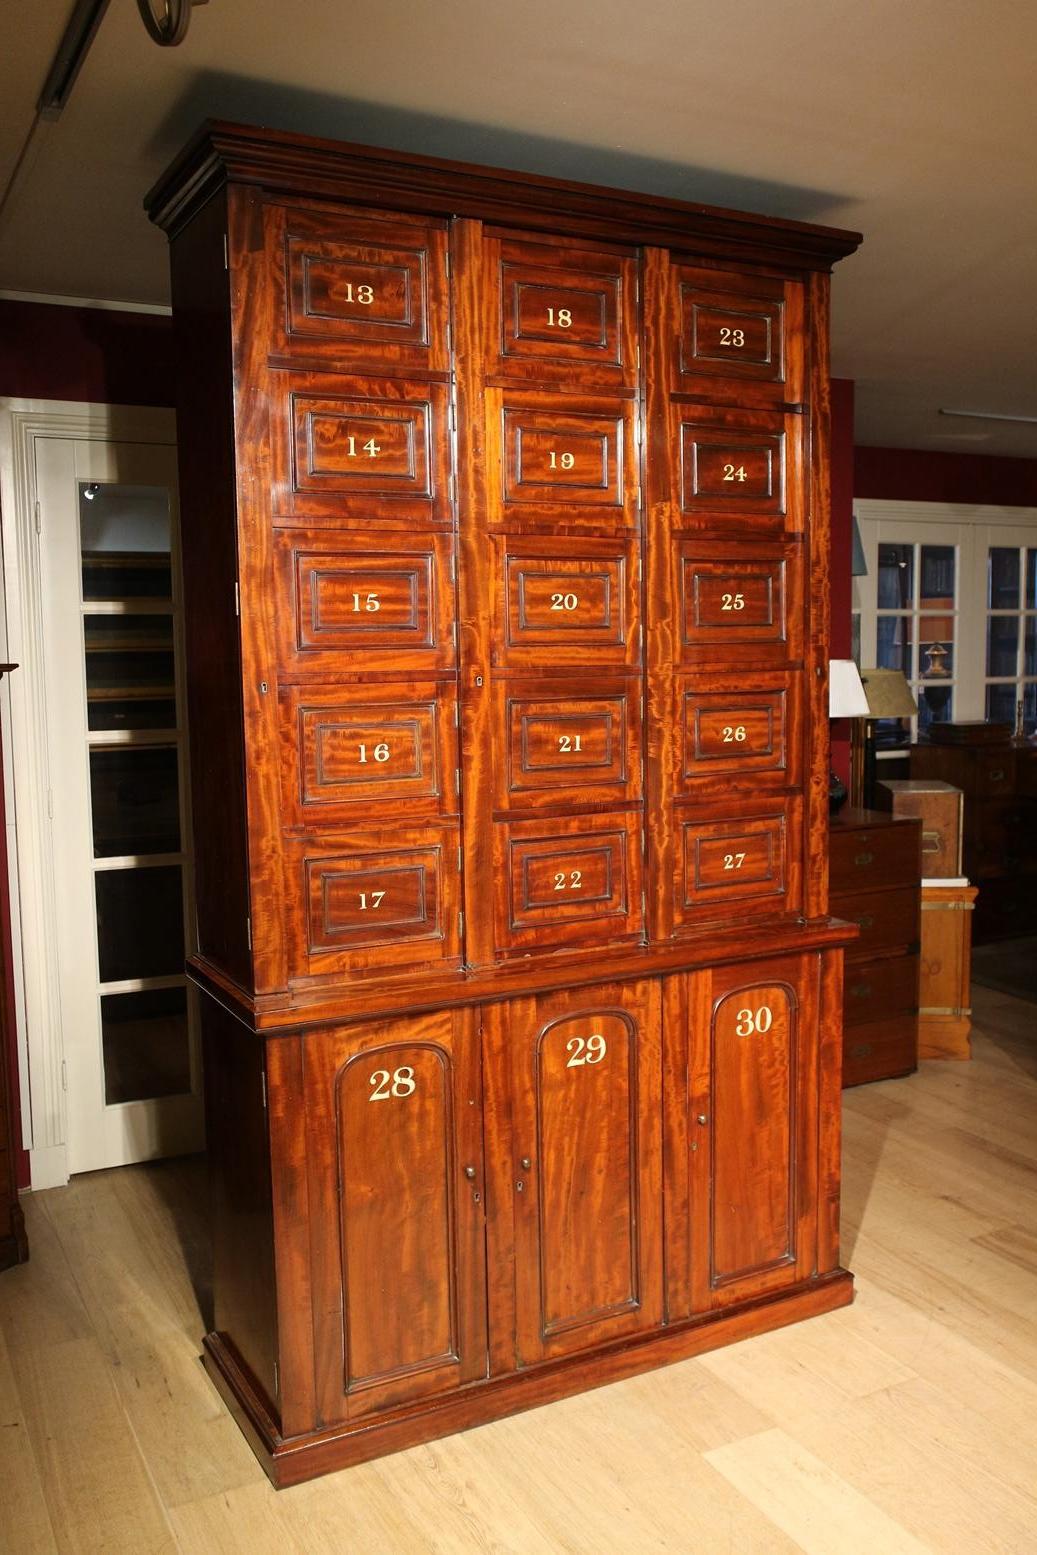 Very special antique mahogany locker cabinet from an English boarding school. The cabinet is completely original and in perfect condition. Nice warm mahogany color. Impressive quality. Unique item.

Origin: England

Period: Approx. 1860

Size